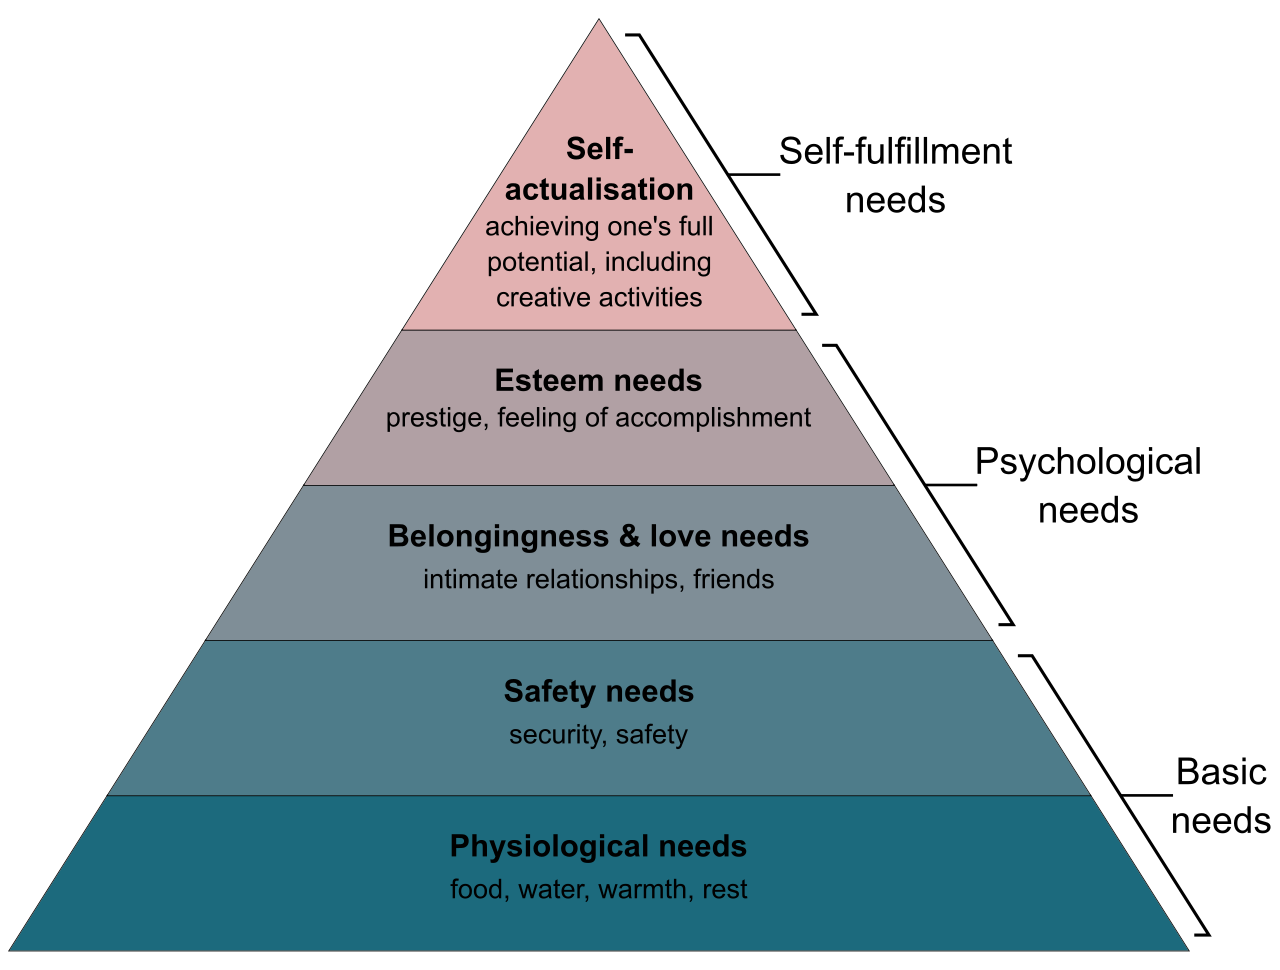 Maslow’s hierarchy of needs, represented as a pyramid with the more basic needs at the bottom